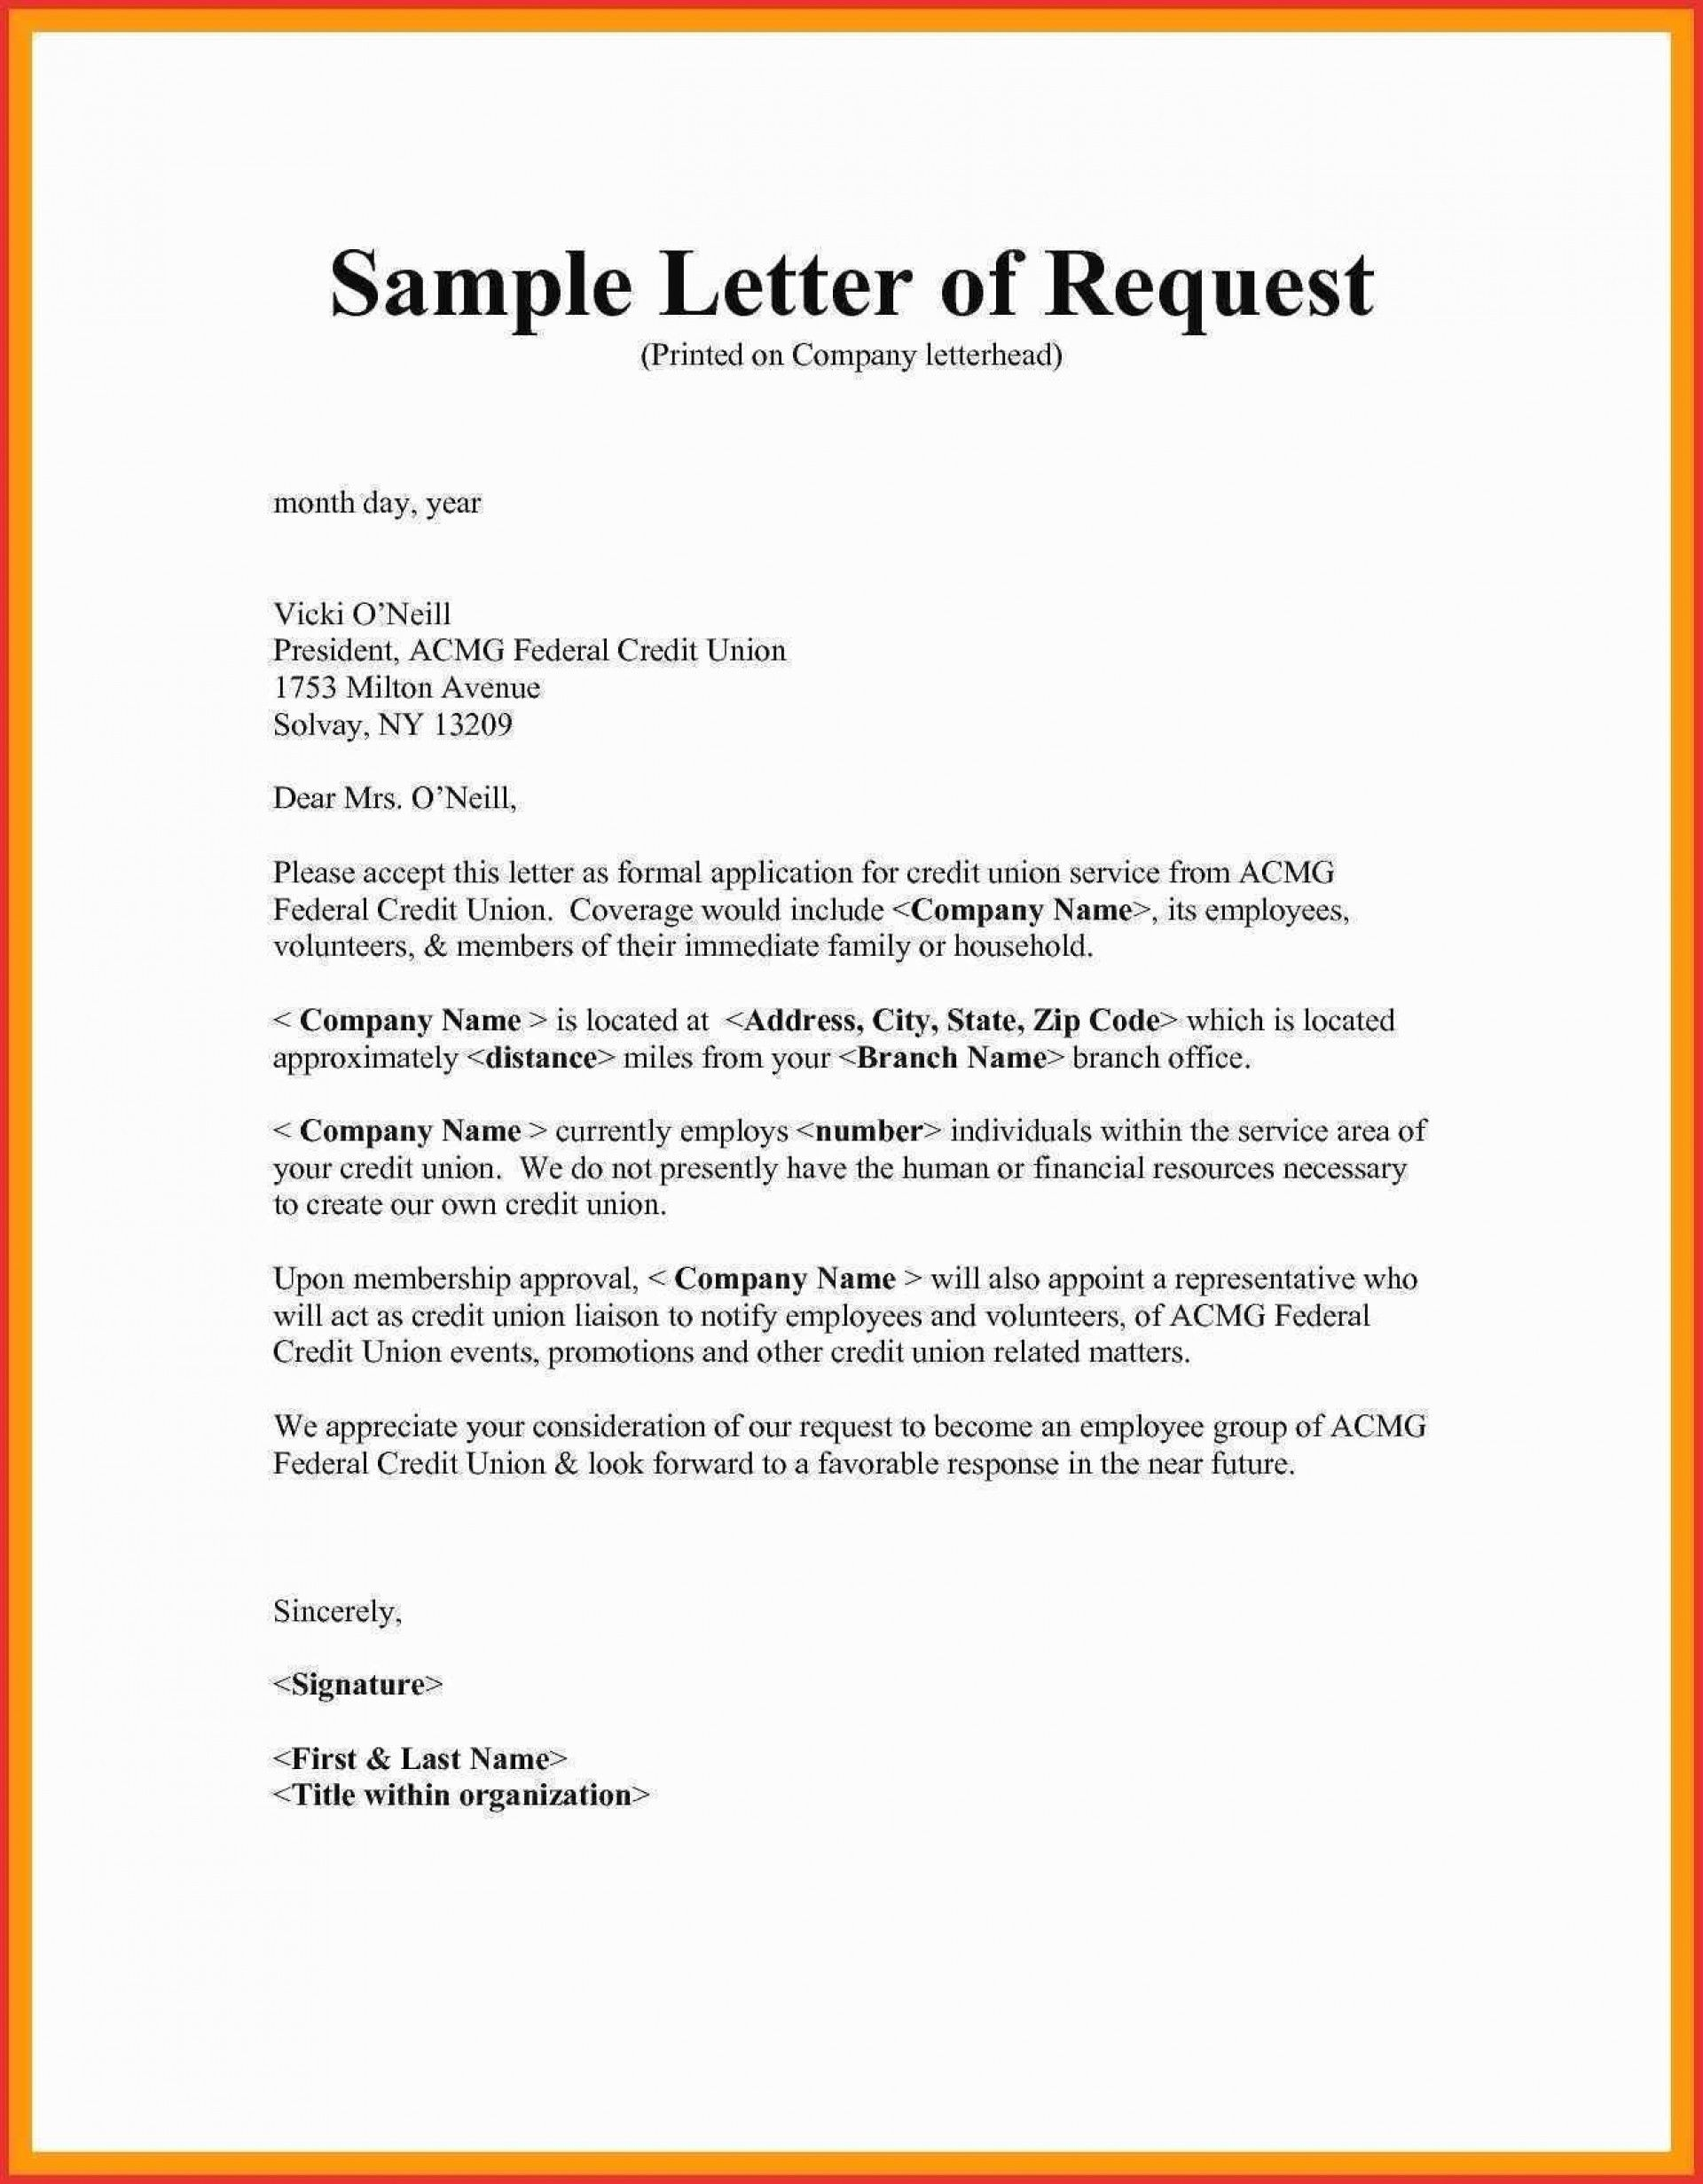 New Staff Salary Increase Recommendation Letter Salary with regard to dimensions 1920 X 2463